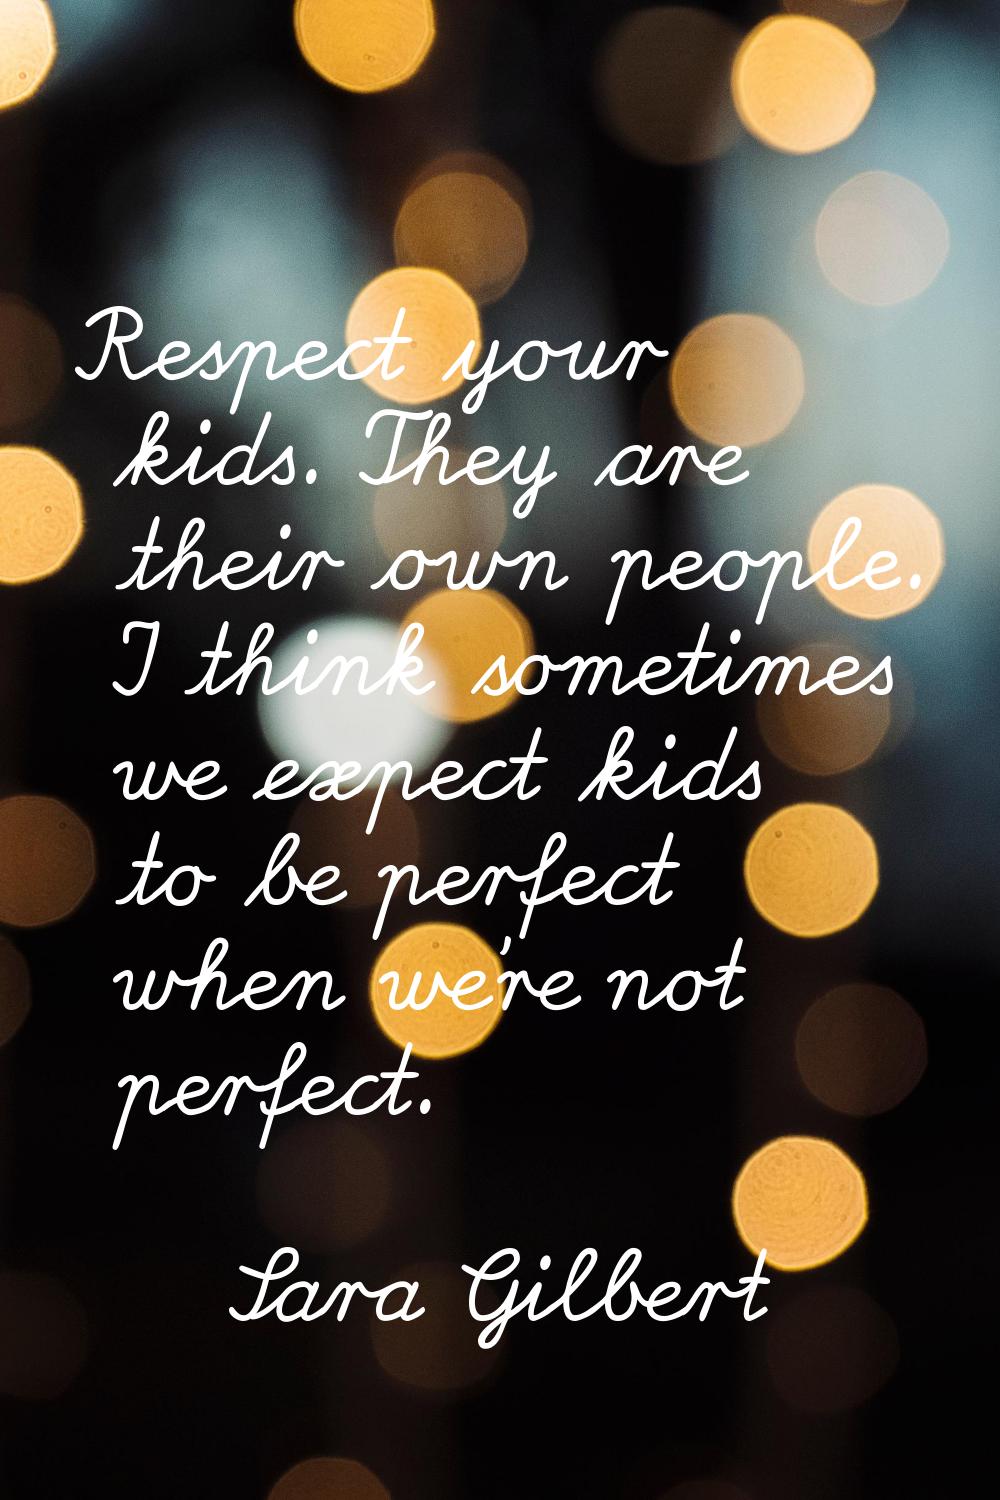 Respect your kids. They are their own people. I think sometimes we expect kids to be perfect when w